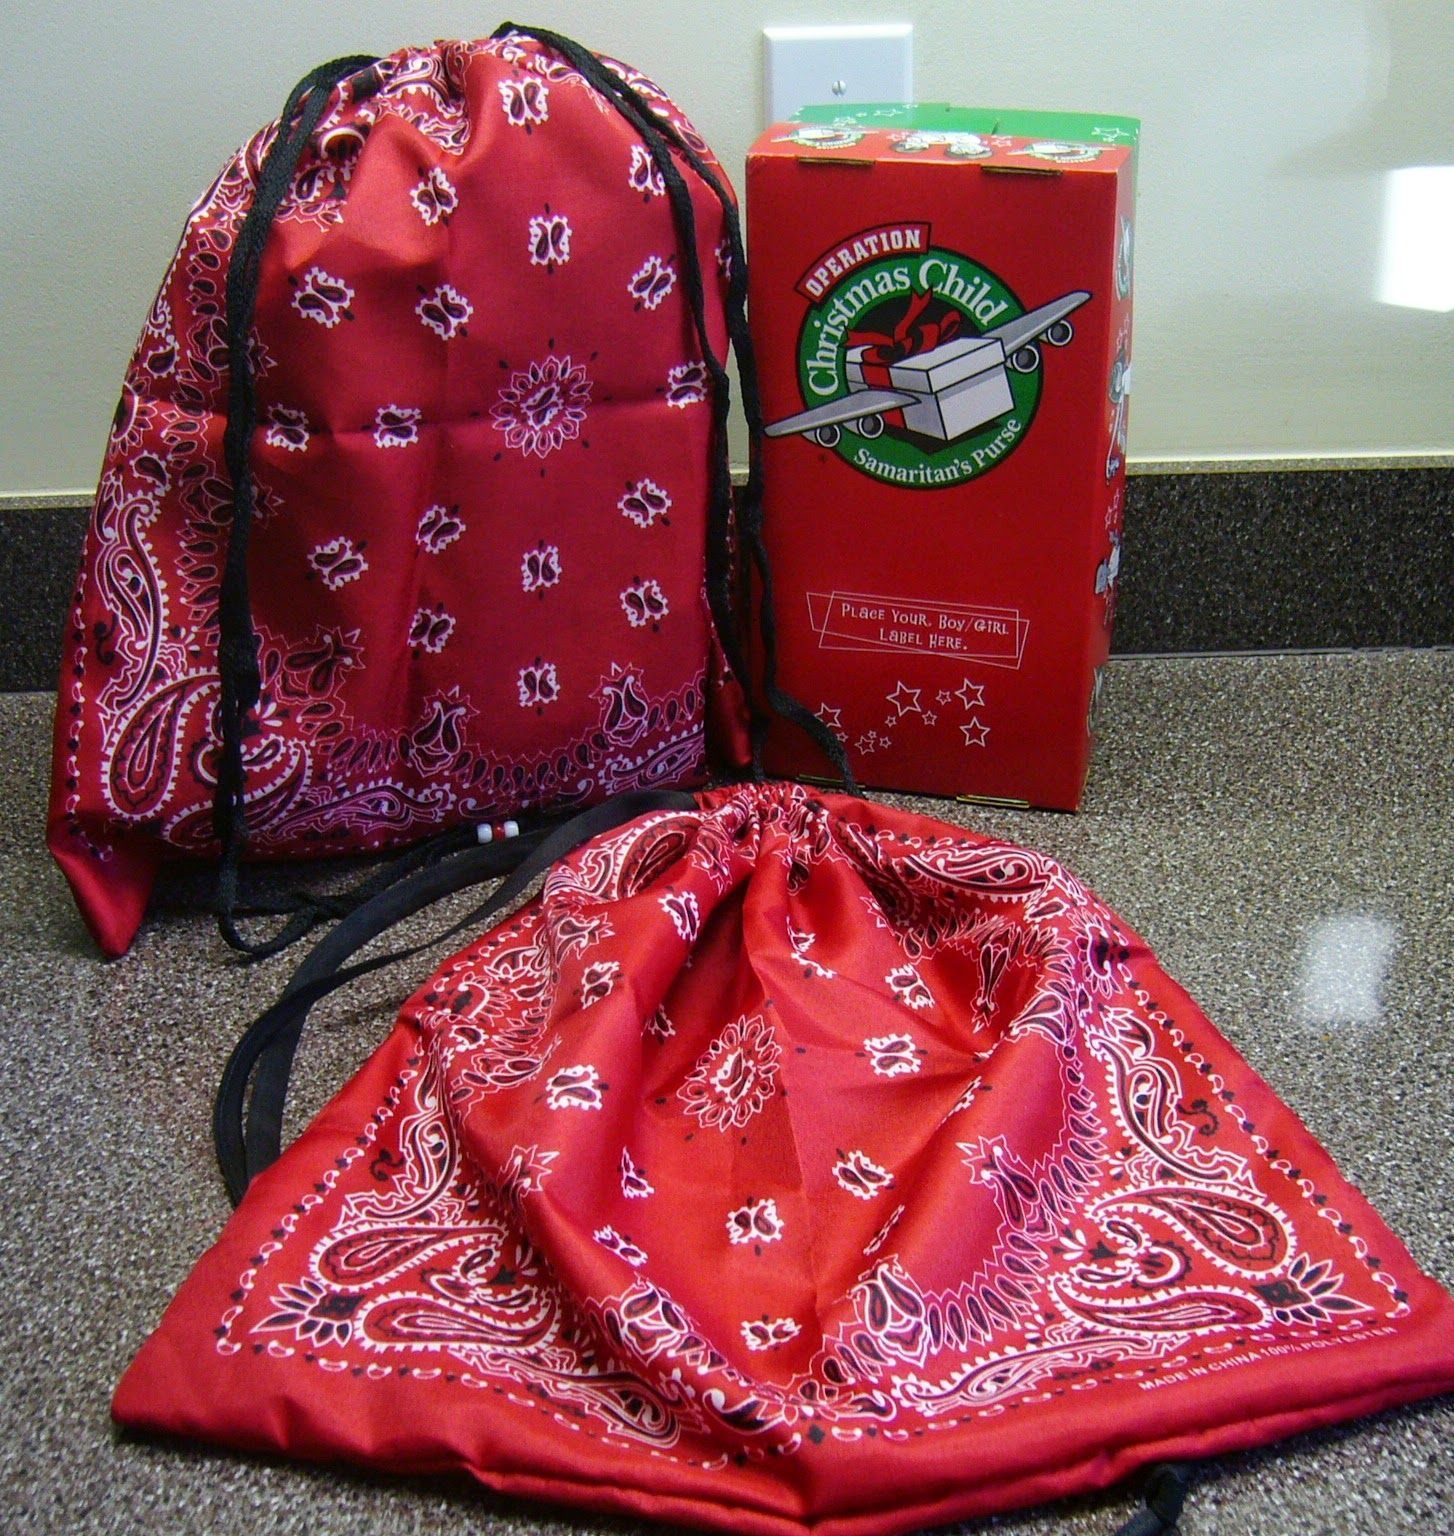 Bandanna 3-Step, Five Minute Drawstring Tote Bag for Operation Christmas Child Shoe Boxes–quick, sturdy &